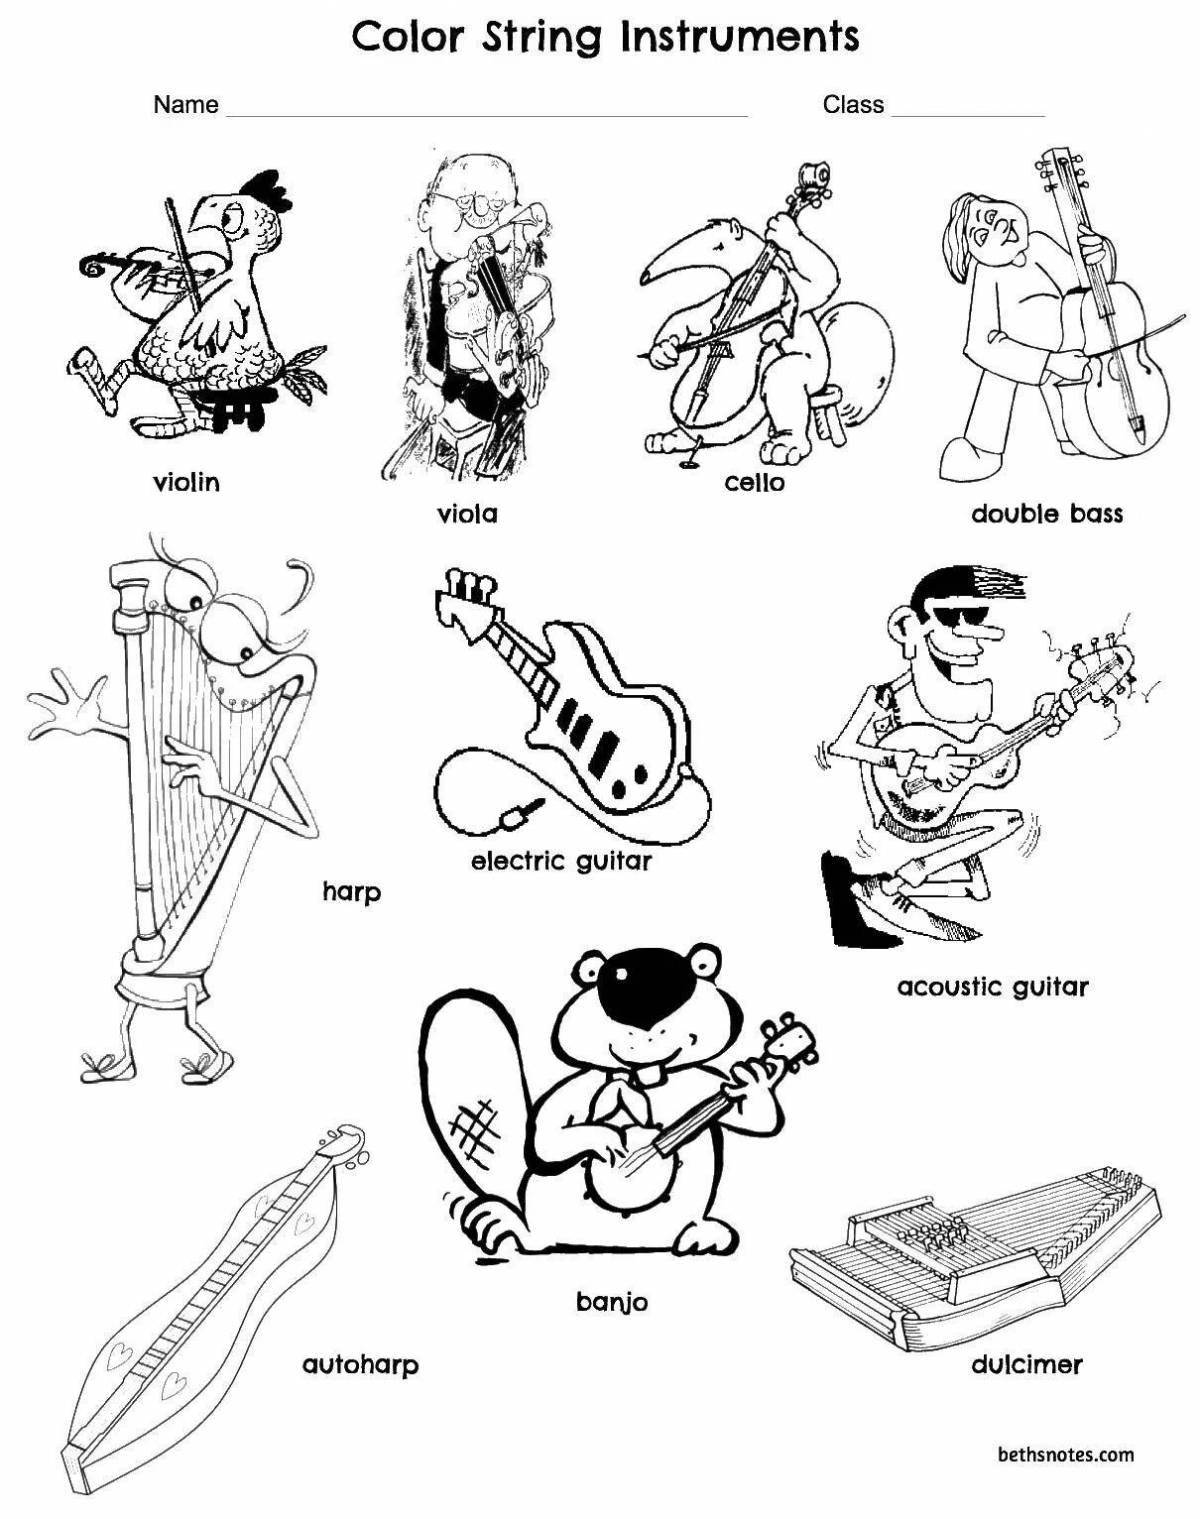 Coloring page of fashionable musical instruments